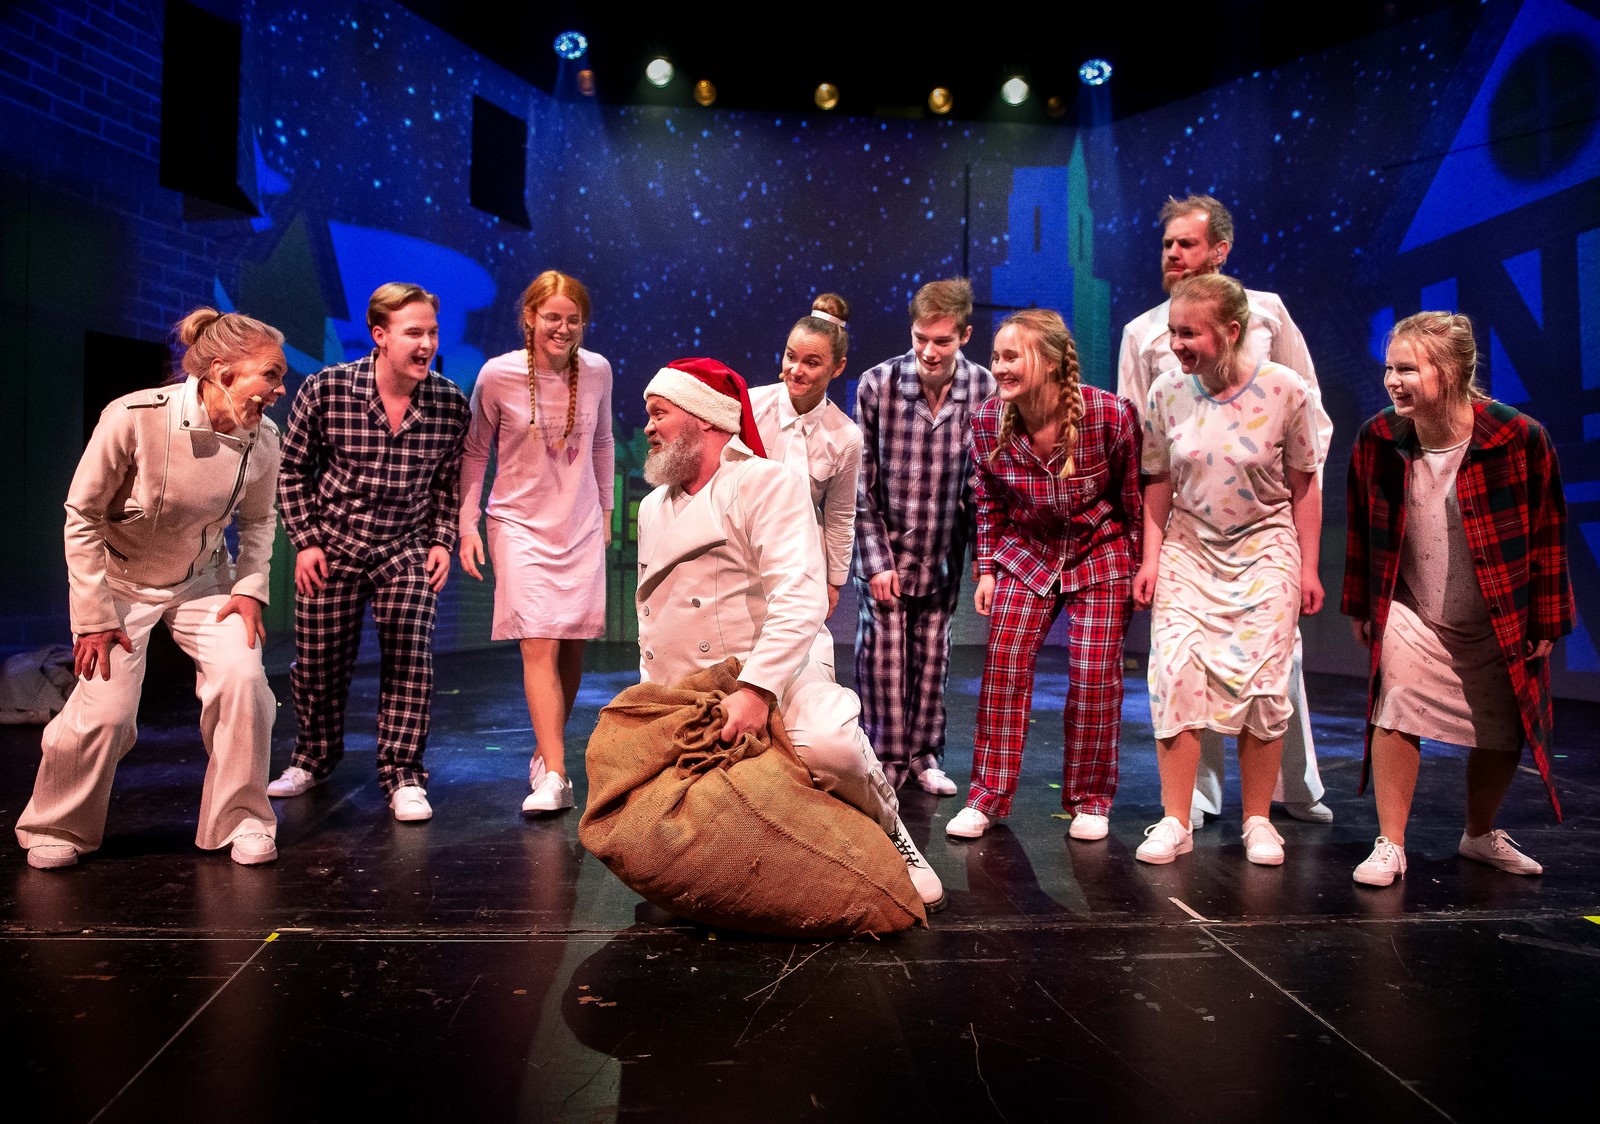 Anmeldelse: This is Christmas, Holbæk Teater